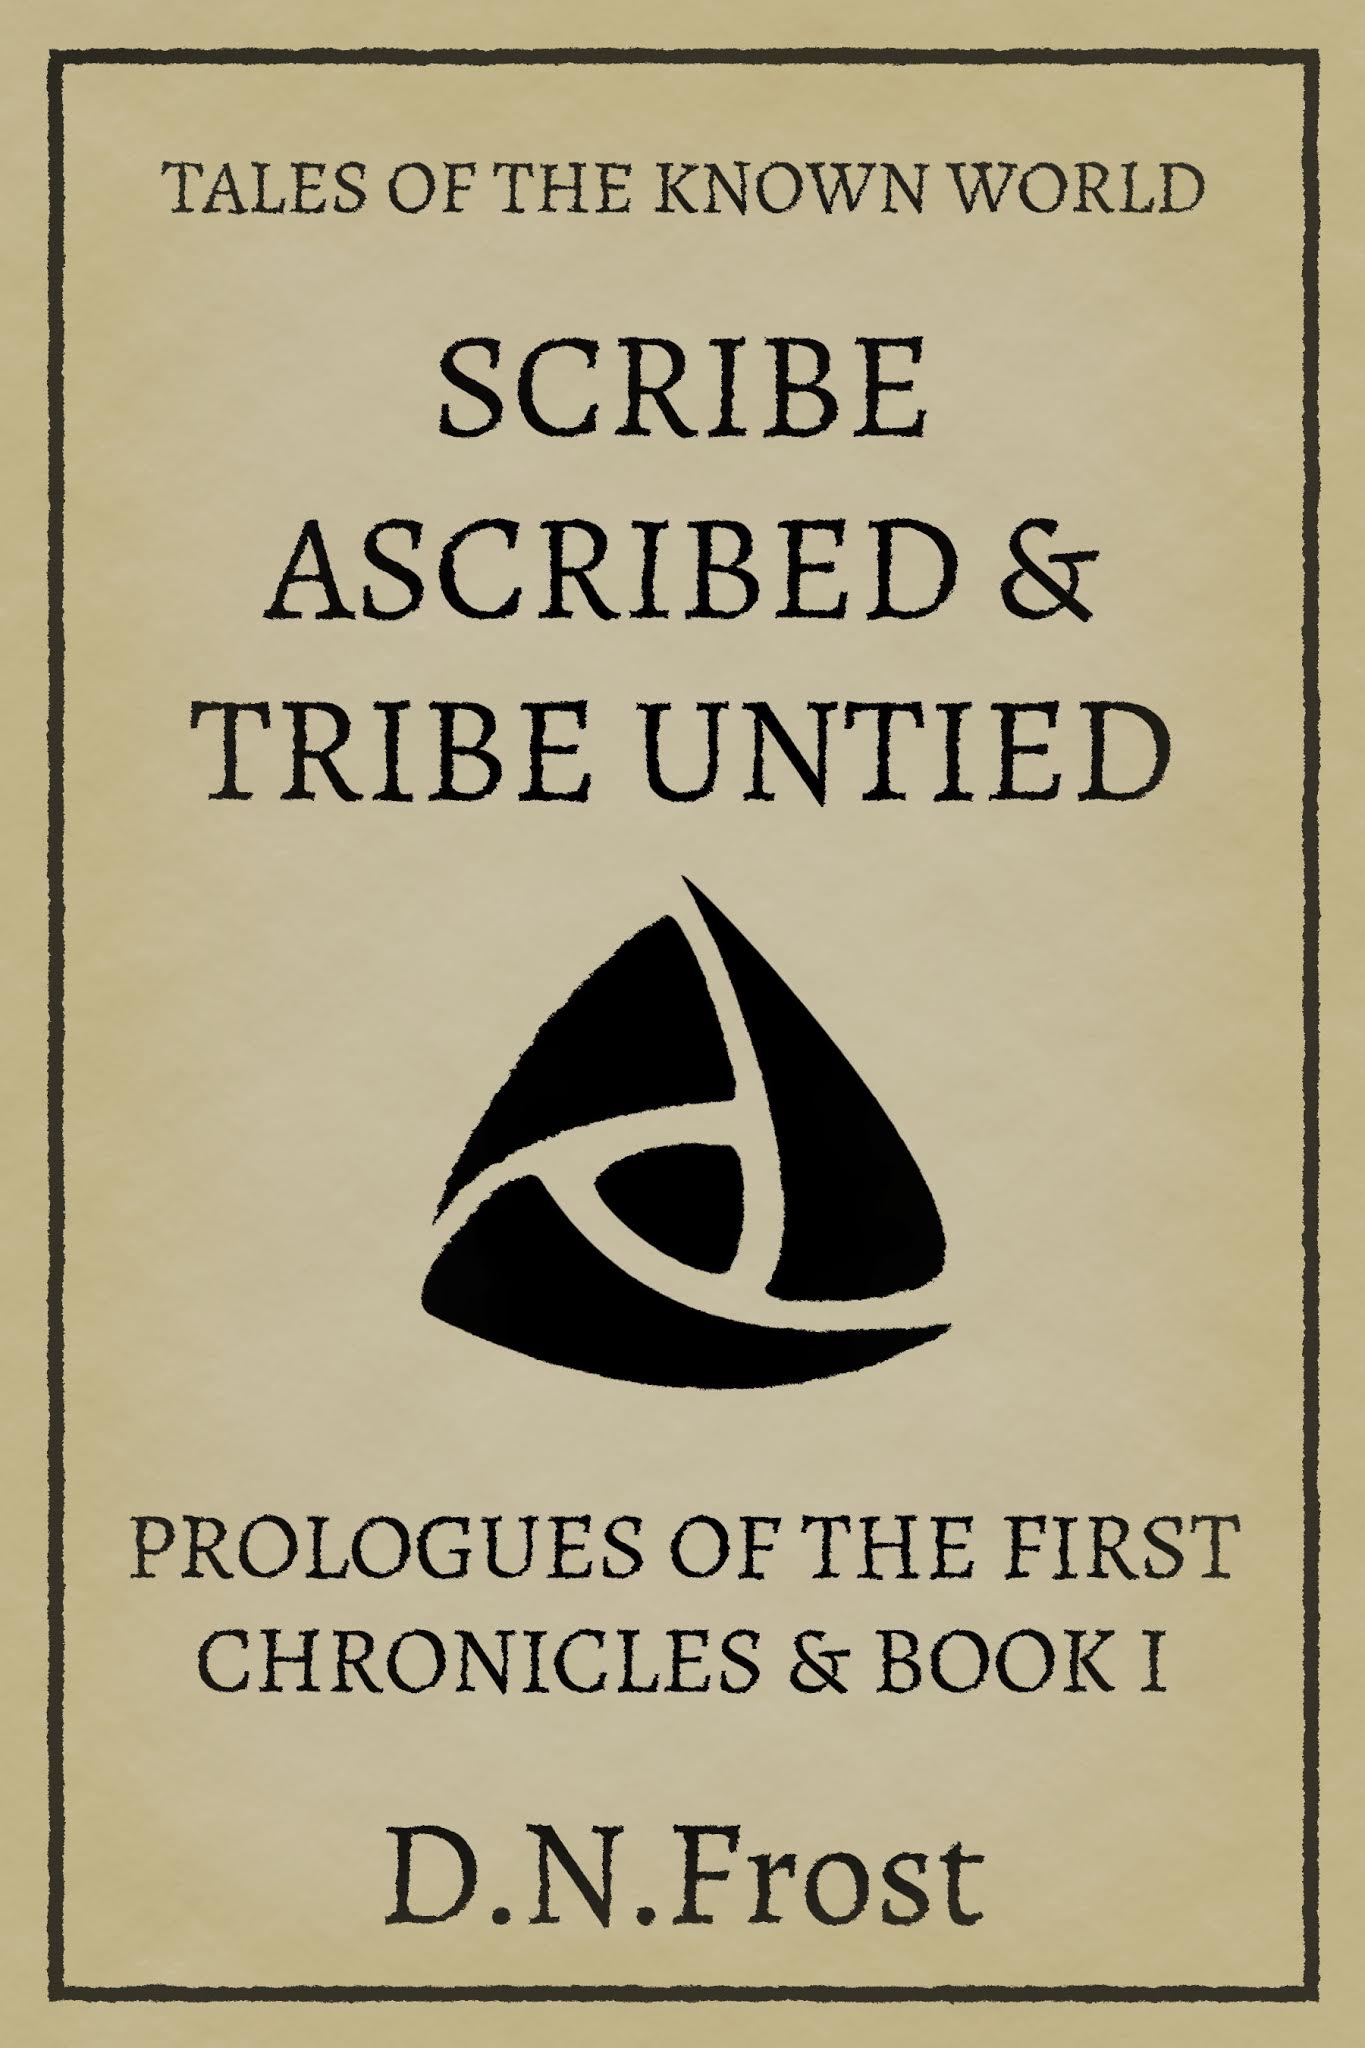 Scribe Ascribed & Tribe Untied: First Bookend, by D.N.Frost. www.DNFrost.com/Bookend1 A two-part adventure from TotKW Books.